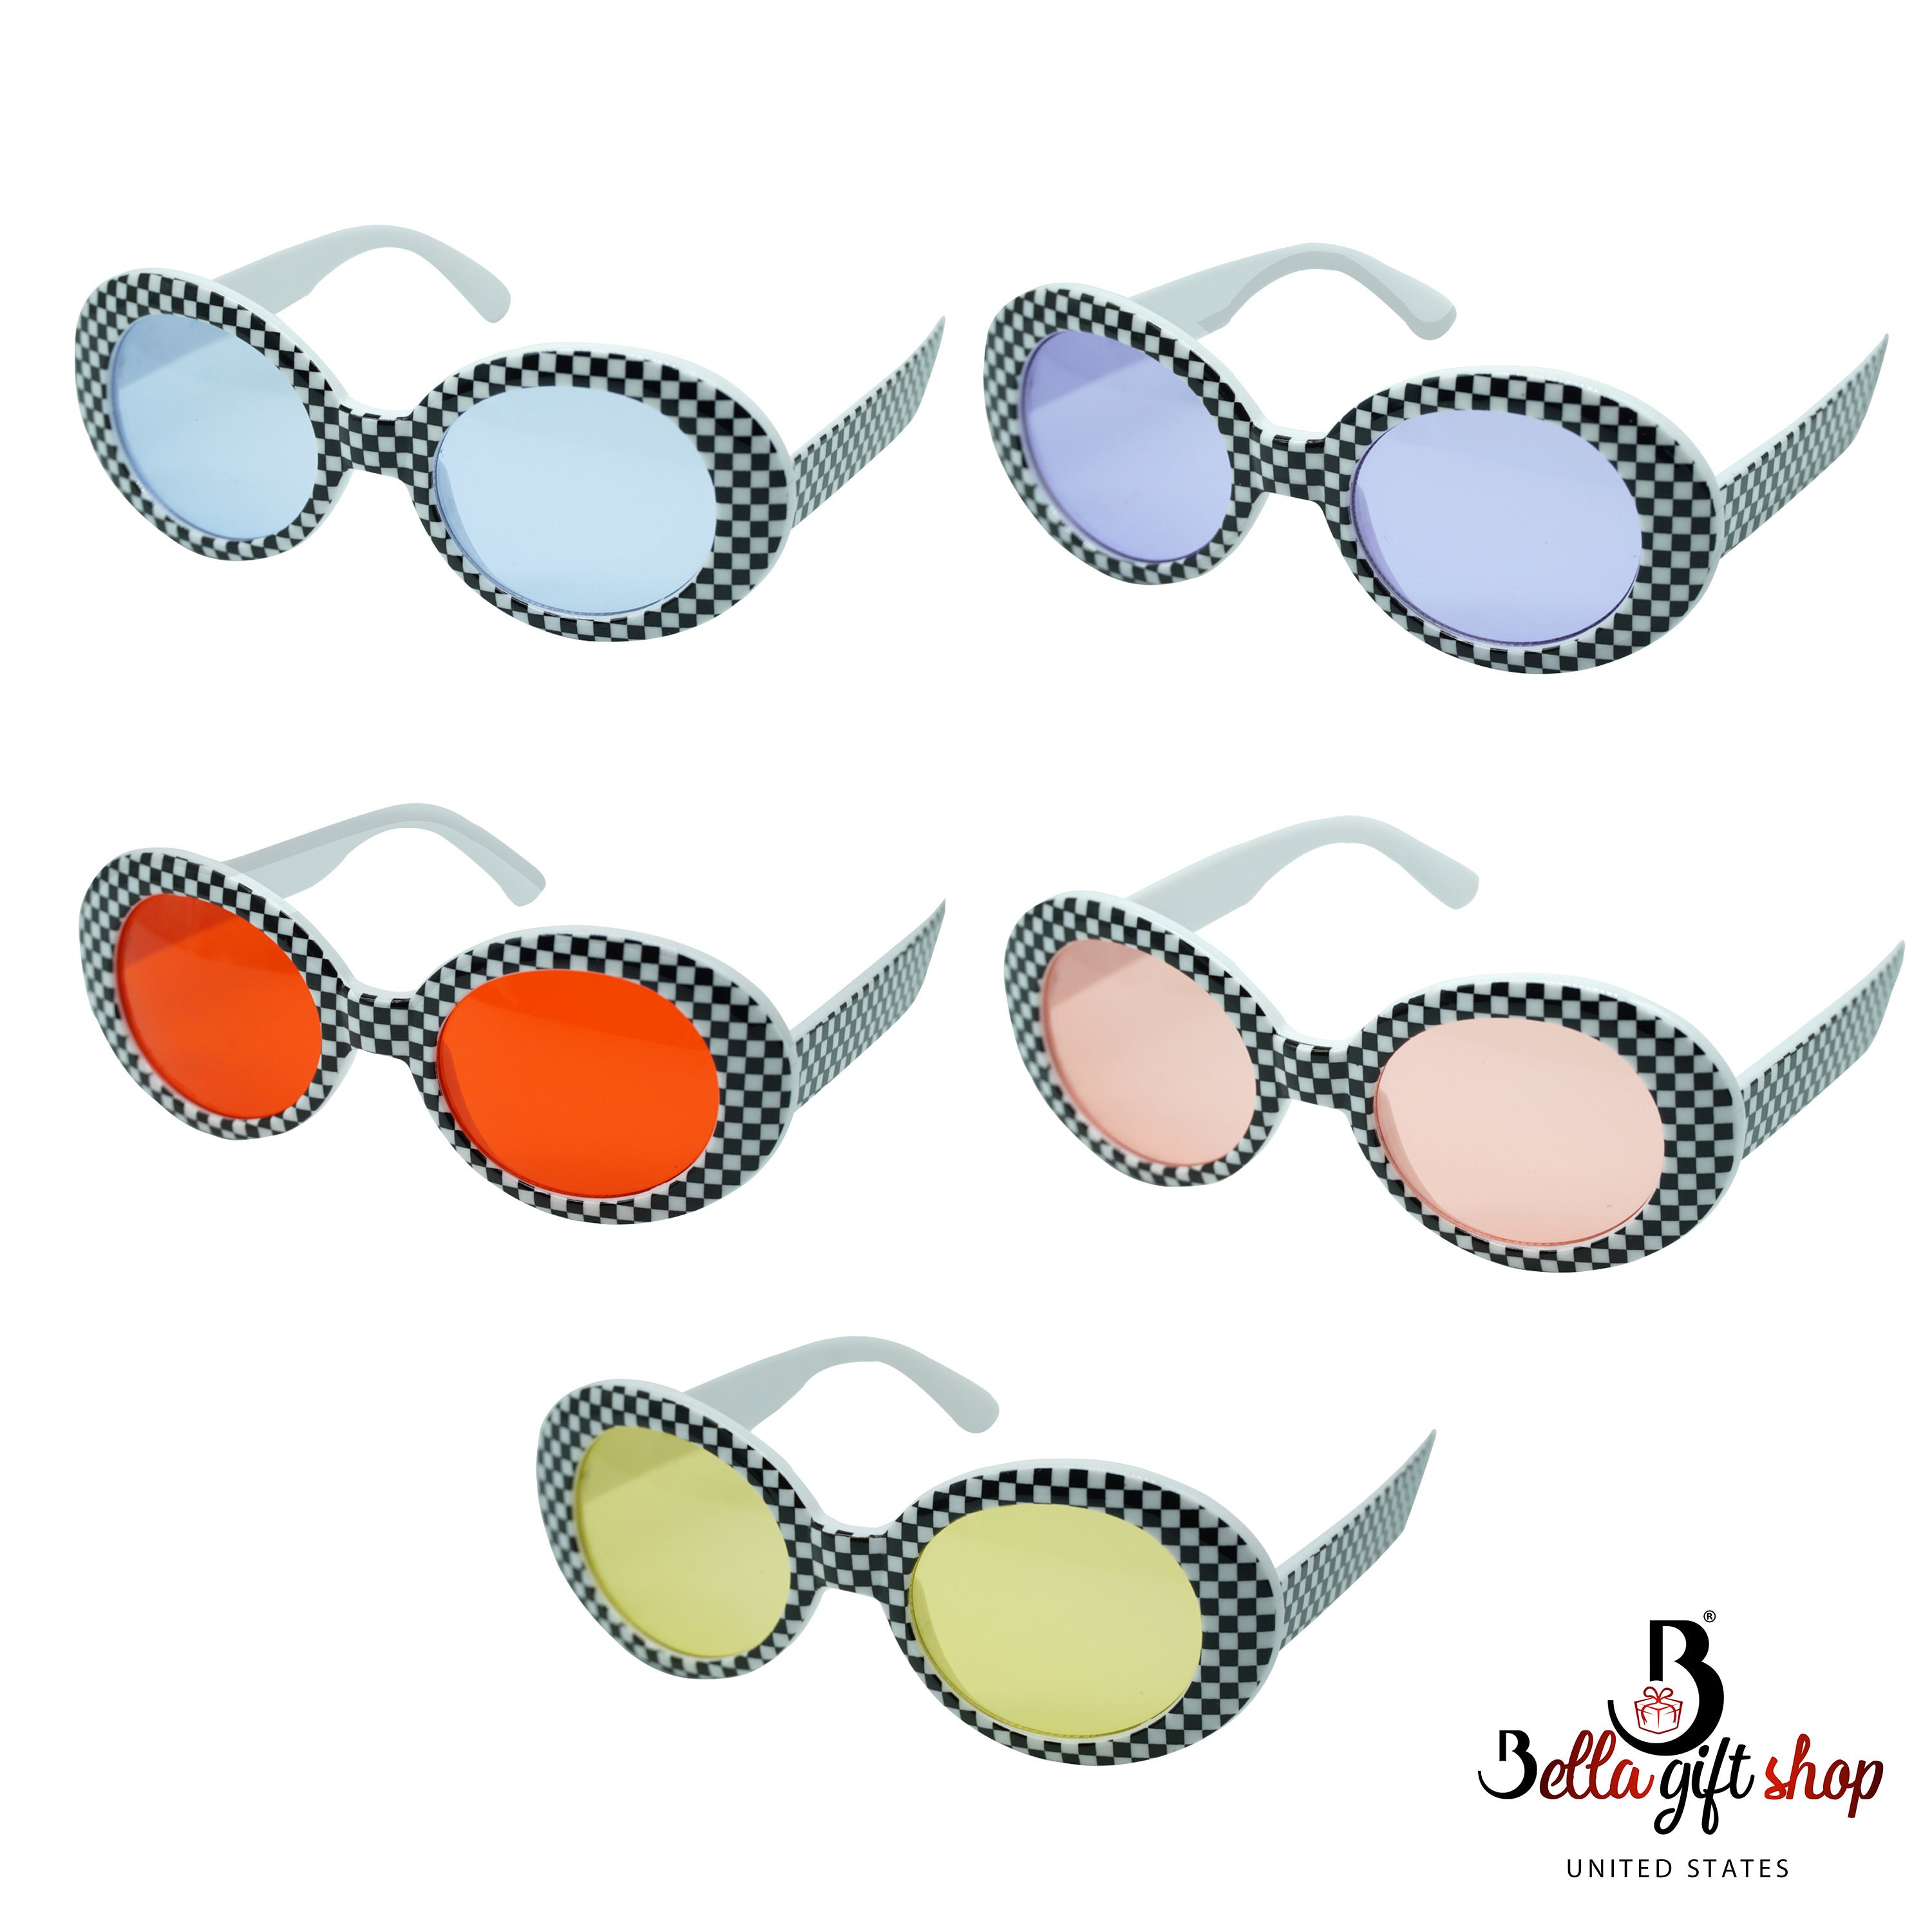 Checkered Clout Sunglasses by Bellagiftshopus Etsy